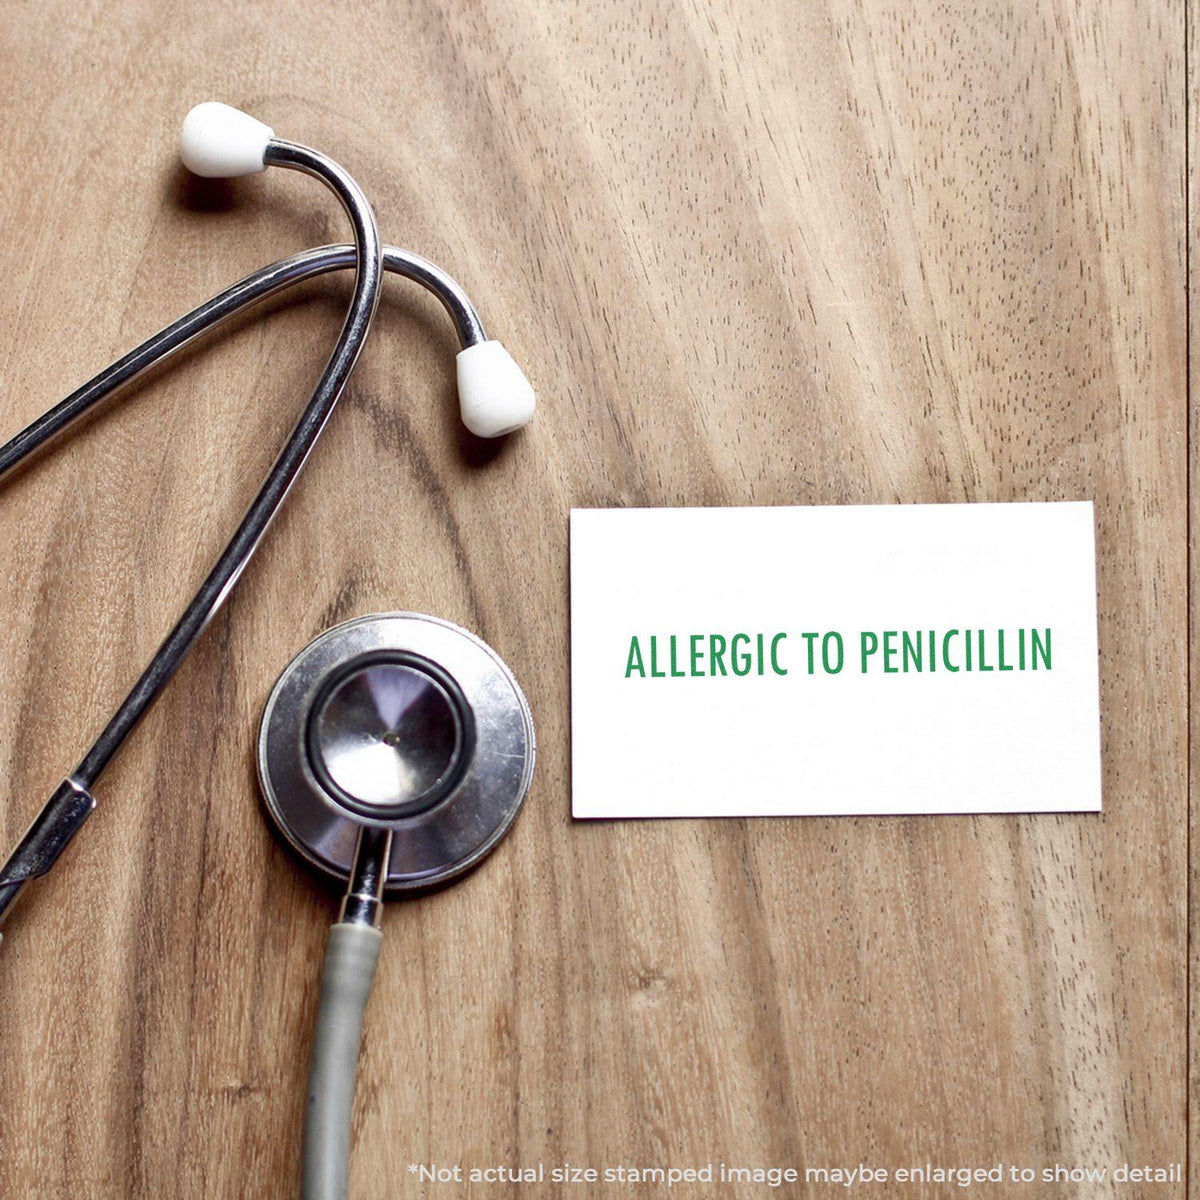 In Use Allergic To Penicillin Rubber Stamp Image